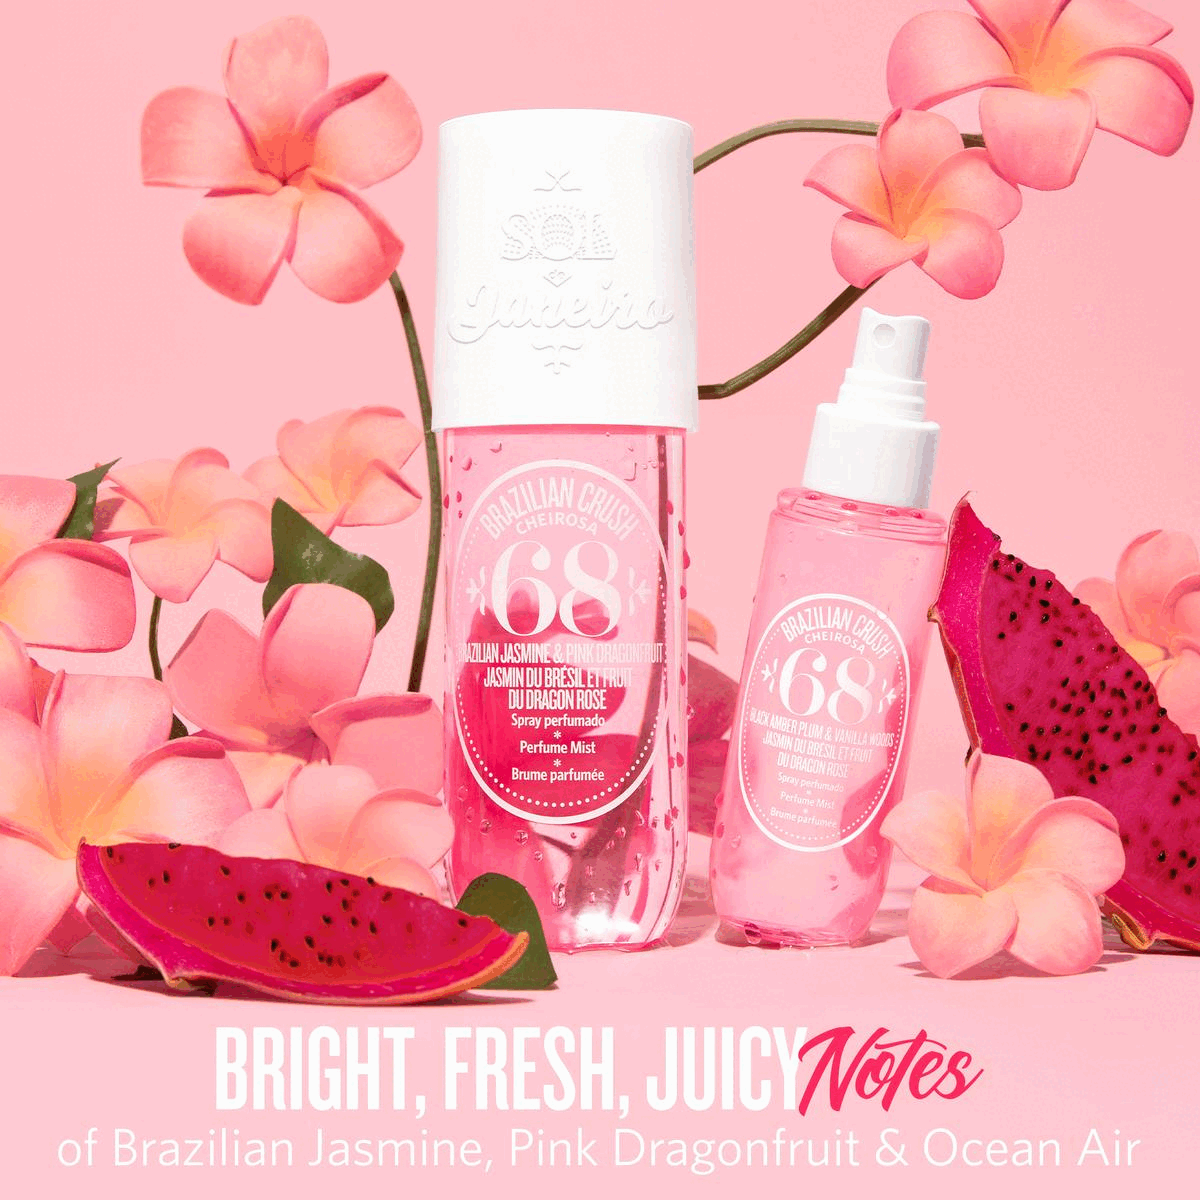 Image 1, bright, fresh, juicy notes of Brazilian Jasmine, Pink Dragonfruit and Ocean Air. Image 2, Pairs with Beija Flor Elasti-Cream for the ultimate Cheirose 68 experience. Image 3, spritz head to toe and on your hair so your scent moves with you. Image 4, in two delicious sizes: classic - 240ml and travel friendly - 90ml. Image 5, Immerse yourself in joy with notes of abundant florals ripe fruit and soft sea breezes. Image 6, vegan friendly, cruelty free, phthalate free and paraben free.